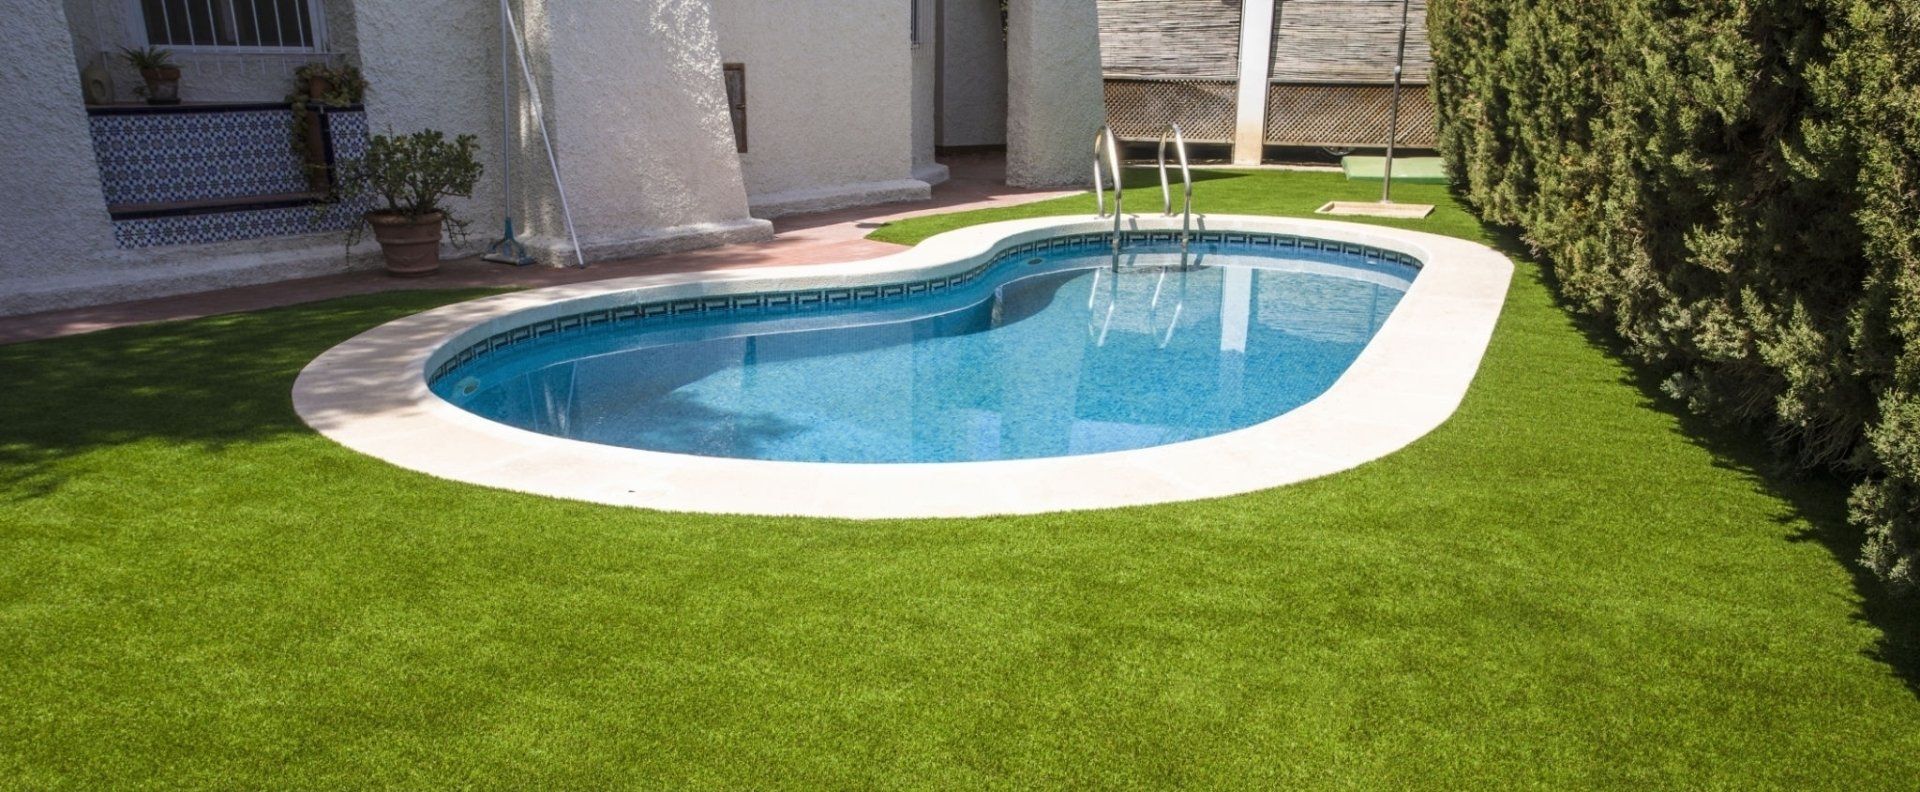 6 Reasons to Install Artificial Turf Around Your Pool in Chandler